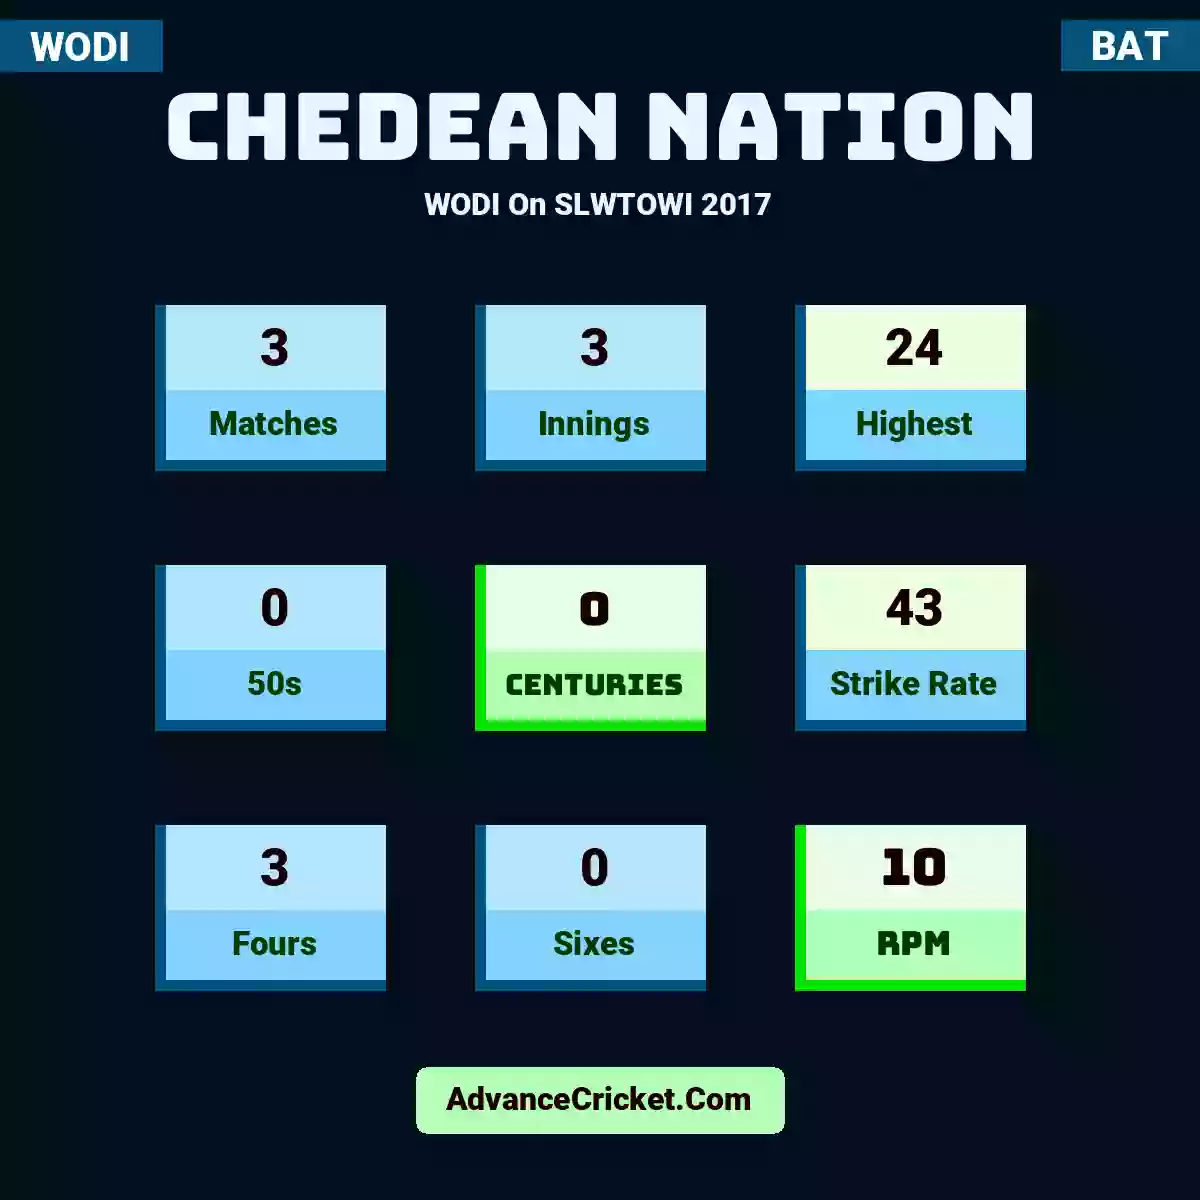 Chedean Nation WODI  On SLWTOWI 2017, Chedean Nation played 3 matches, scored 24 runs as highest, 0 half-centuries, and 0 centuries, with a strike rate of 43. C.Nation hit 3 fours and 0 sixes, with an RPM of 10.